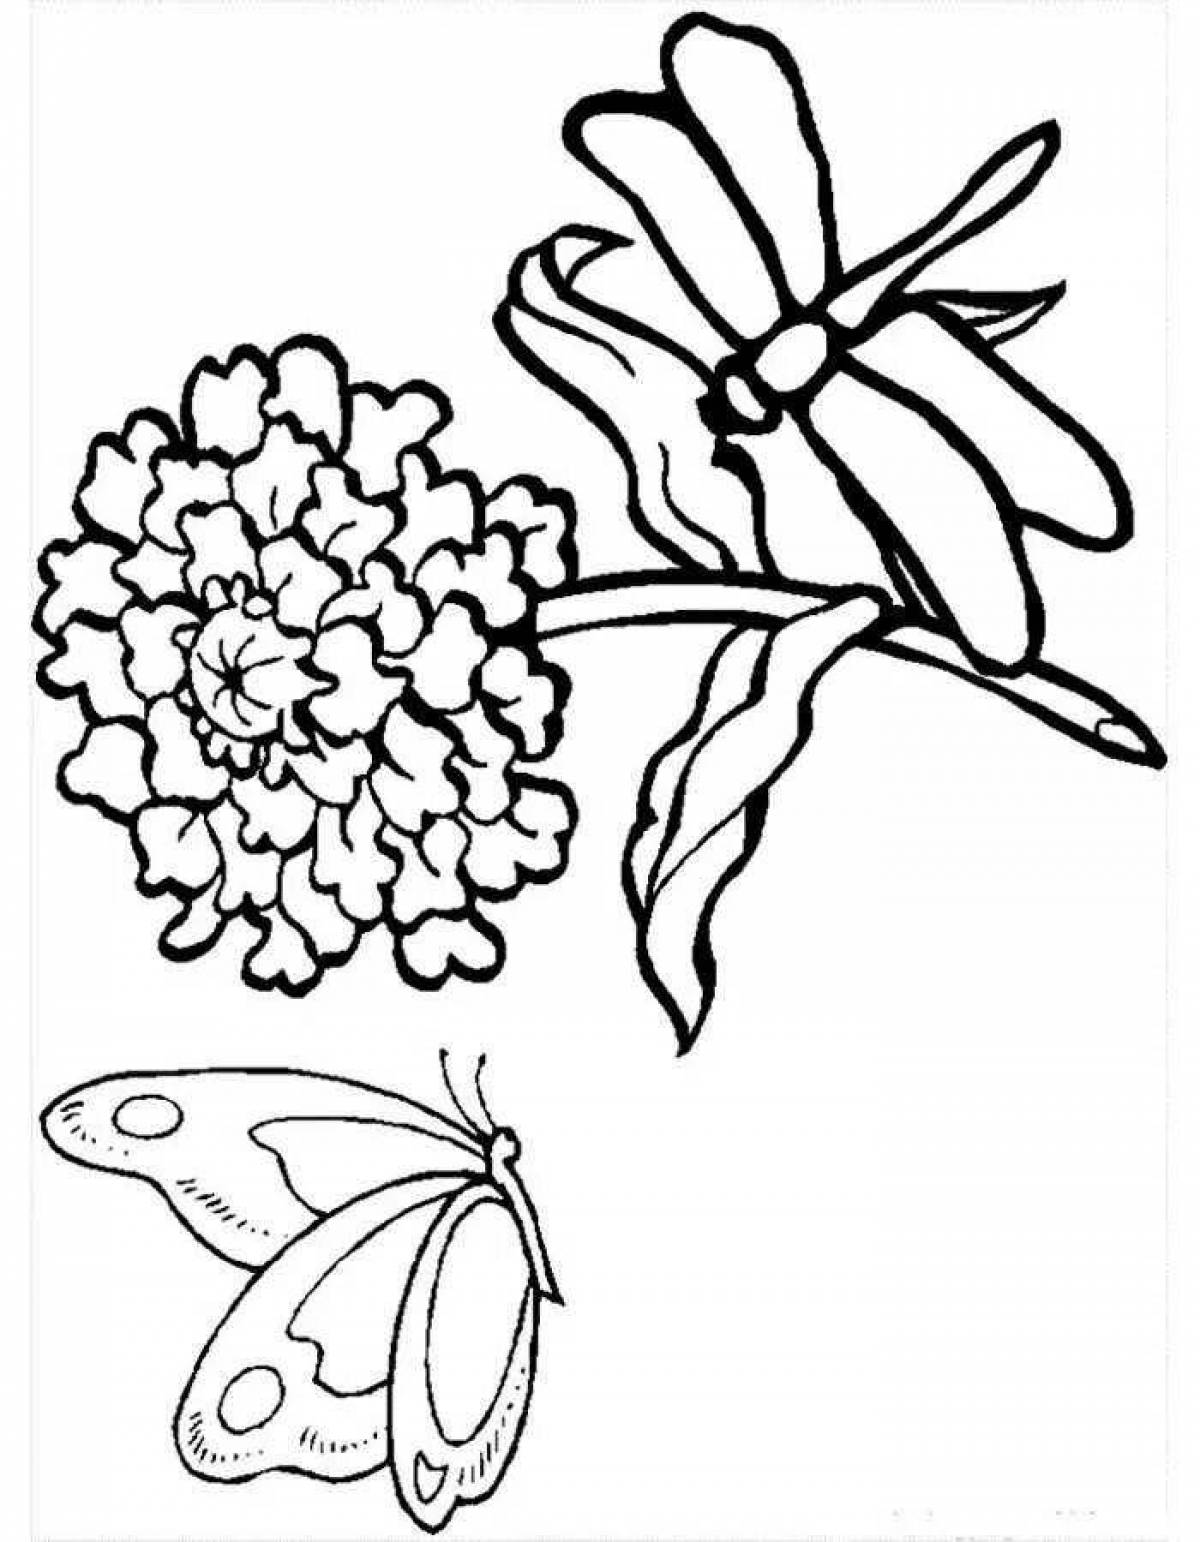 Violent coloring of flowers and butterflies